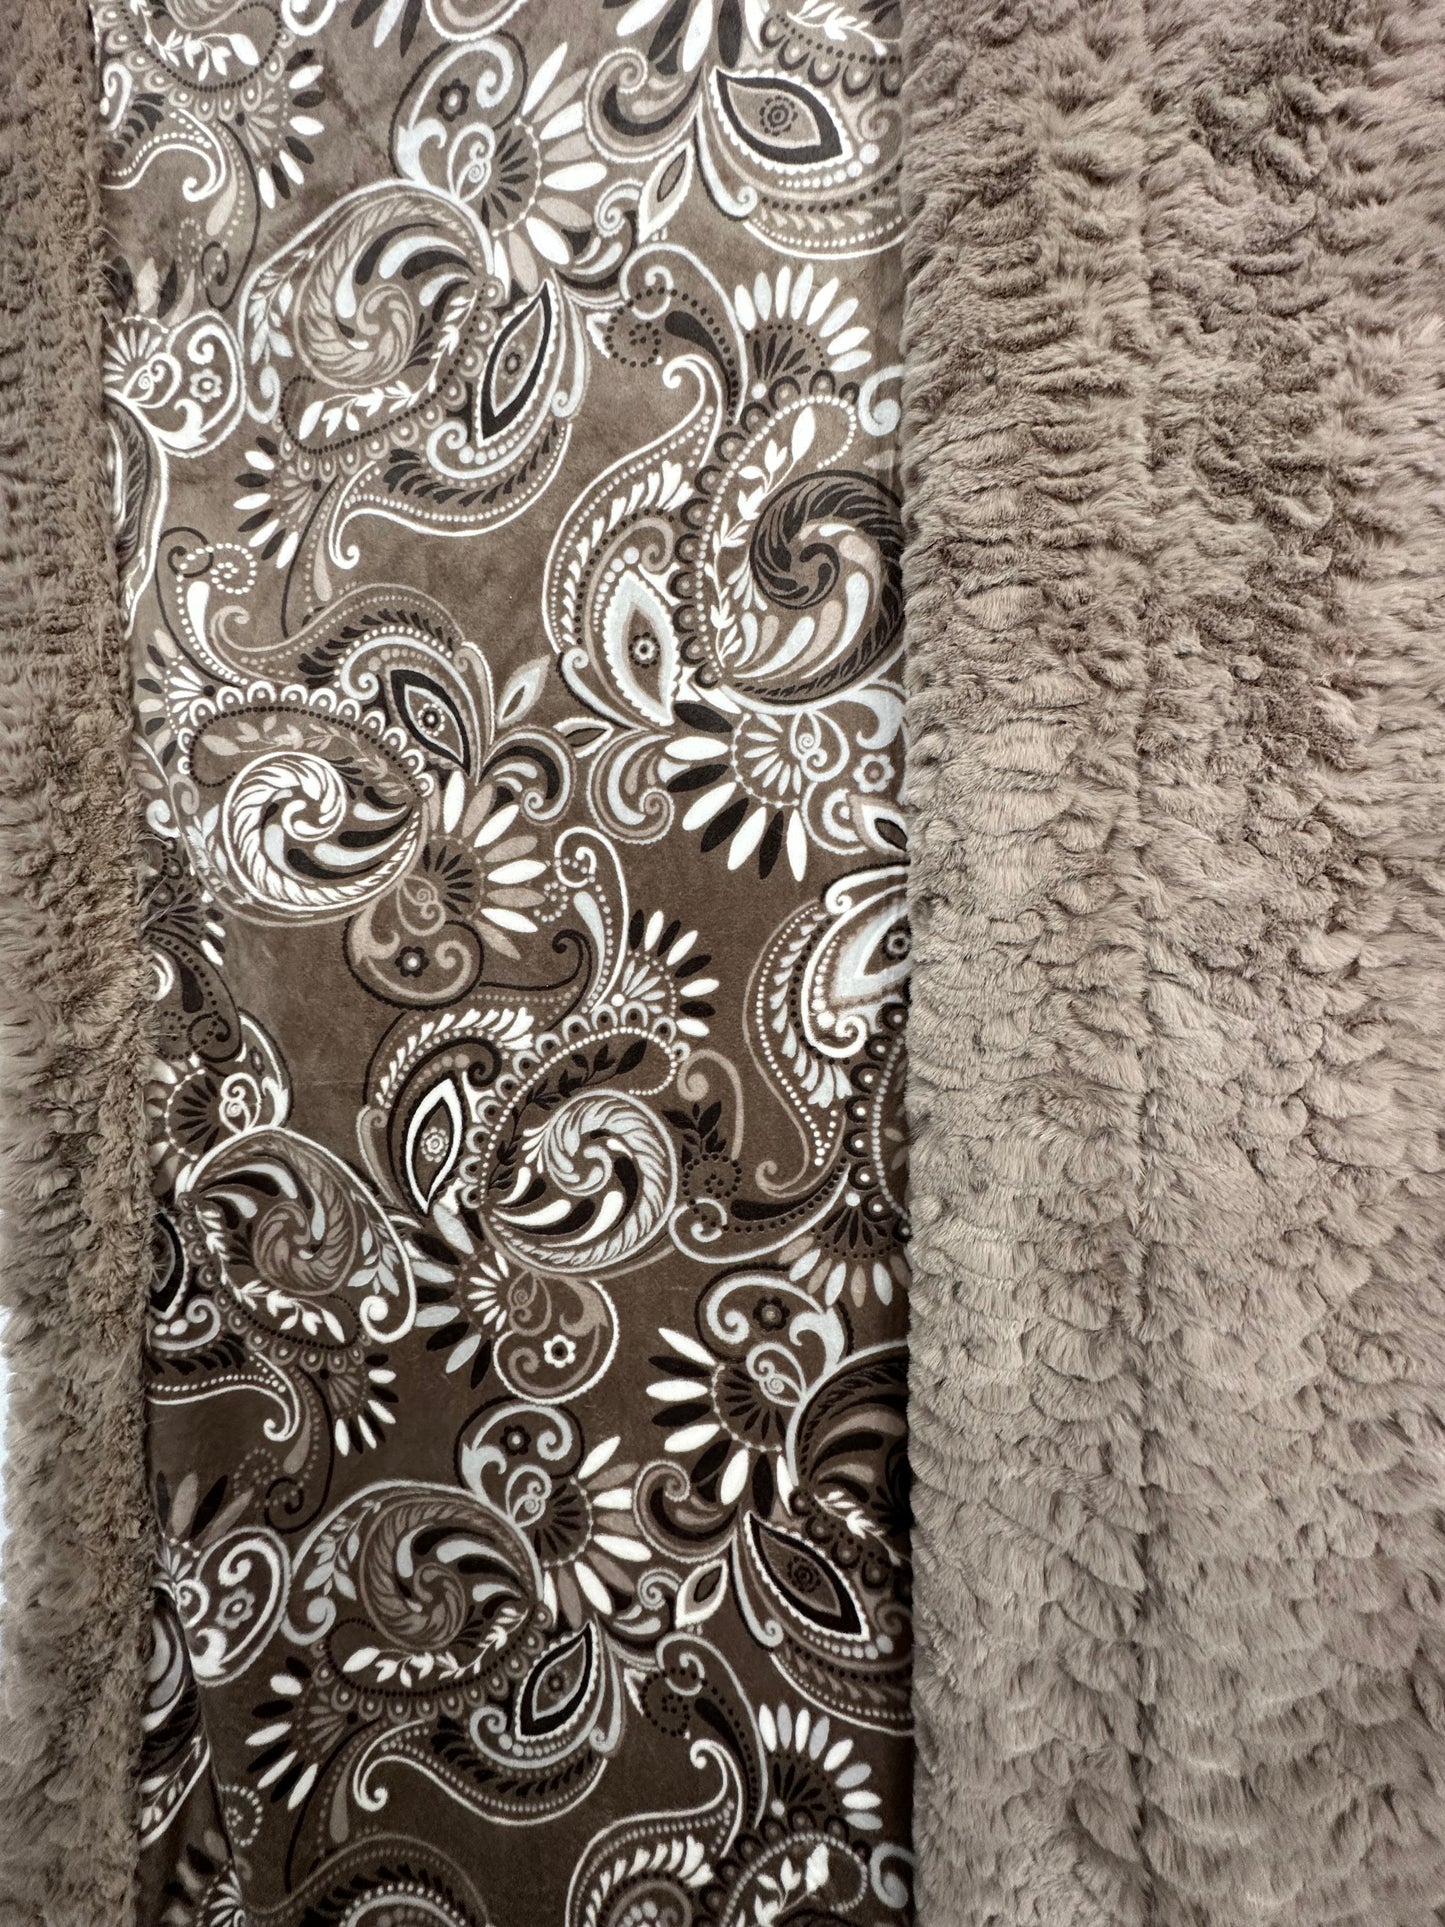 Paisley Taupe on Light Taupe Florence Adult Blanket - Comfort and Style Combined - 53x75